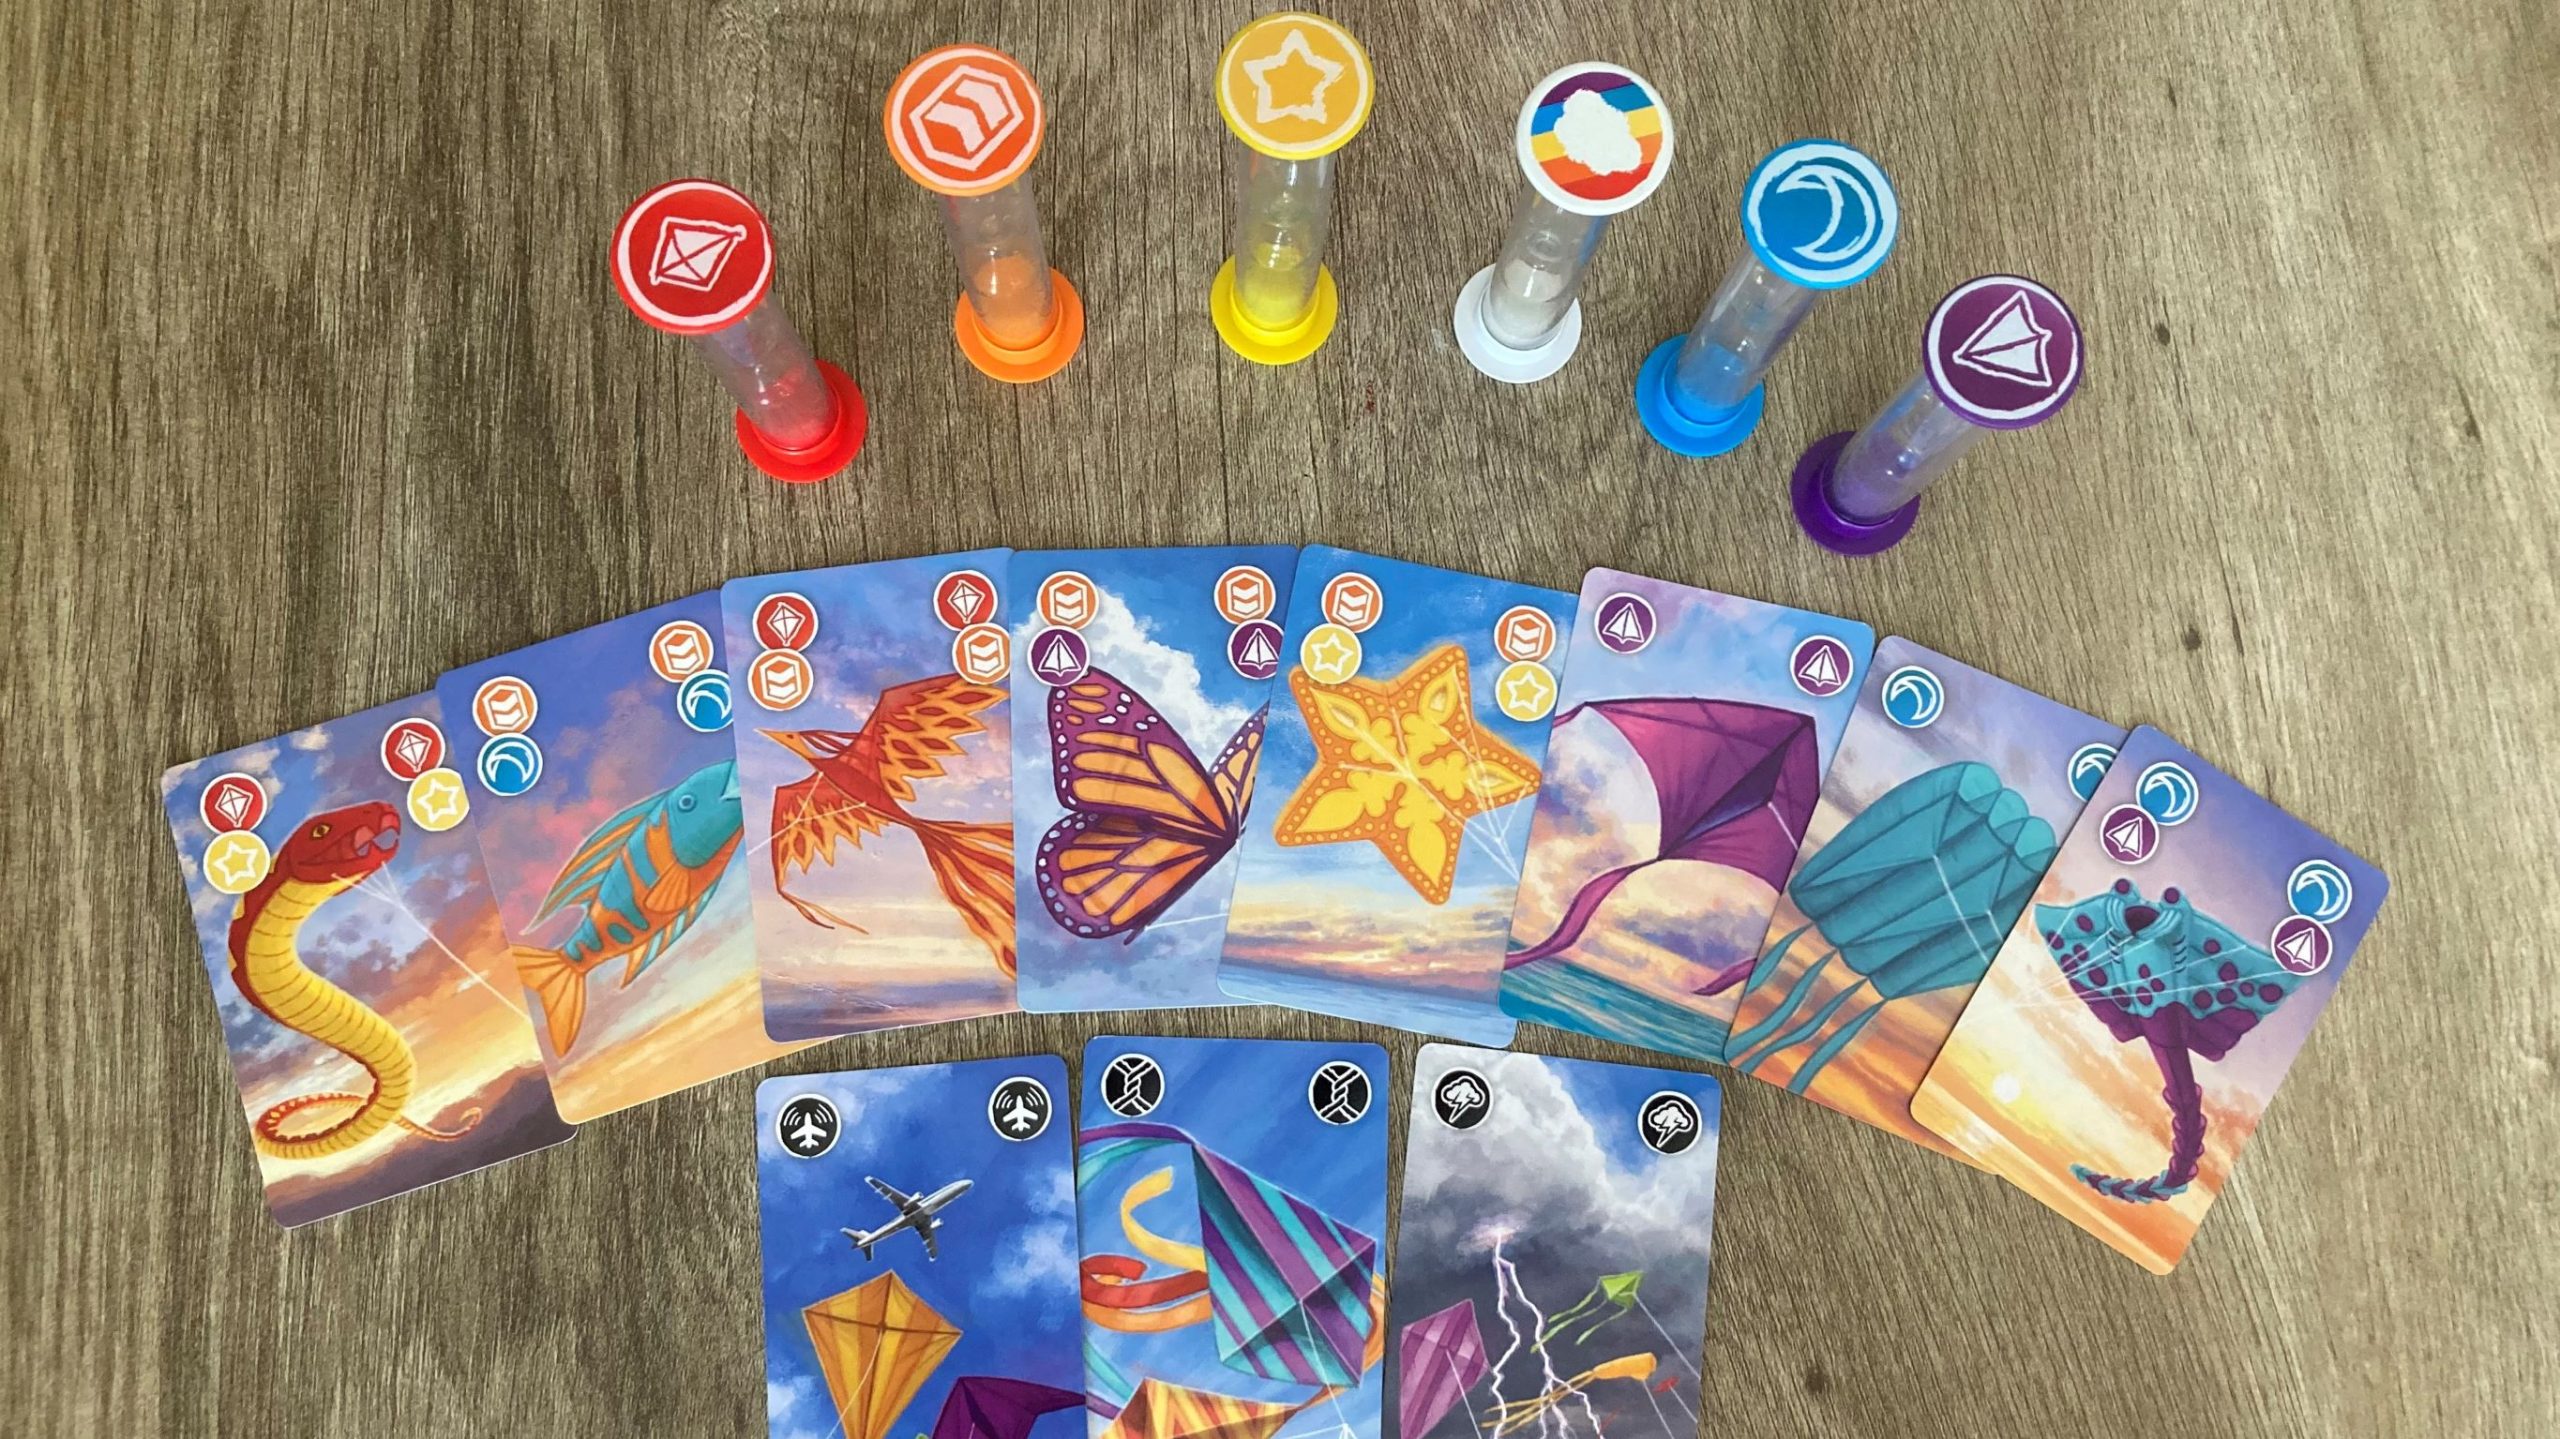 Cards from the game Kites under the colored hourglasses